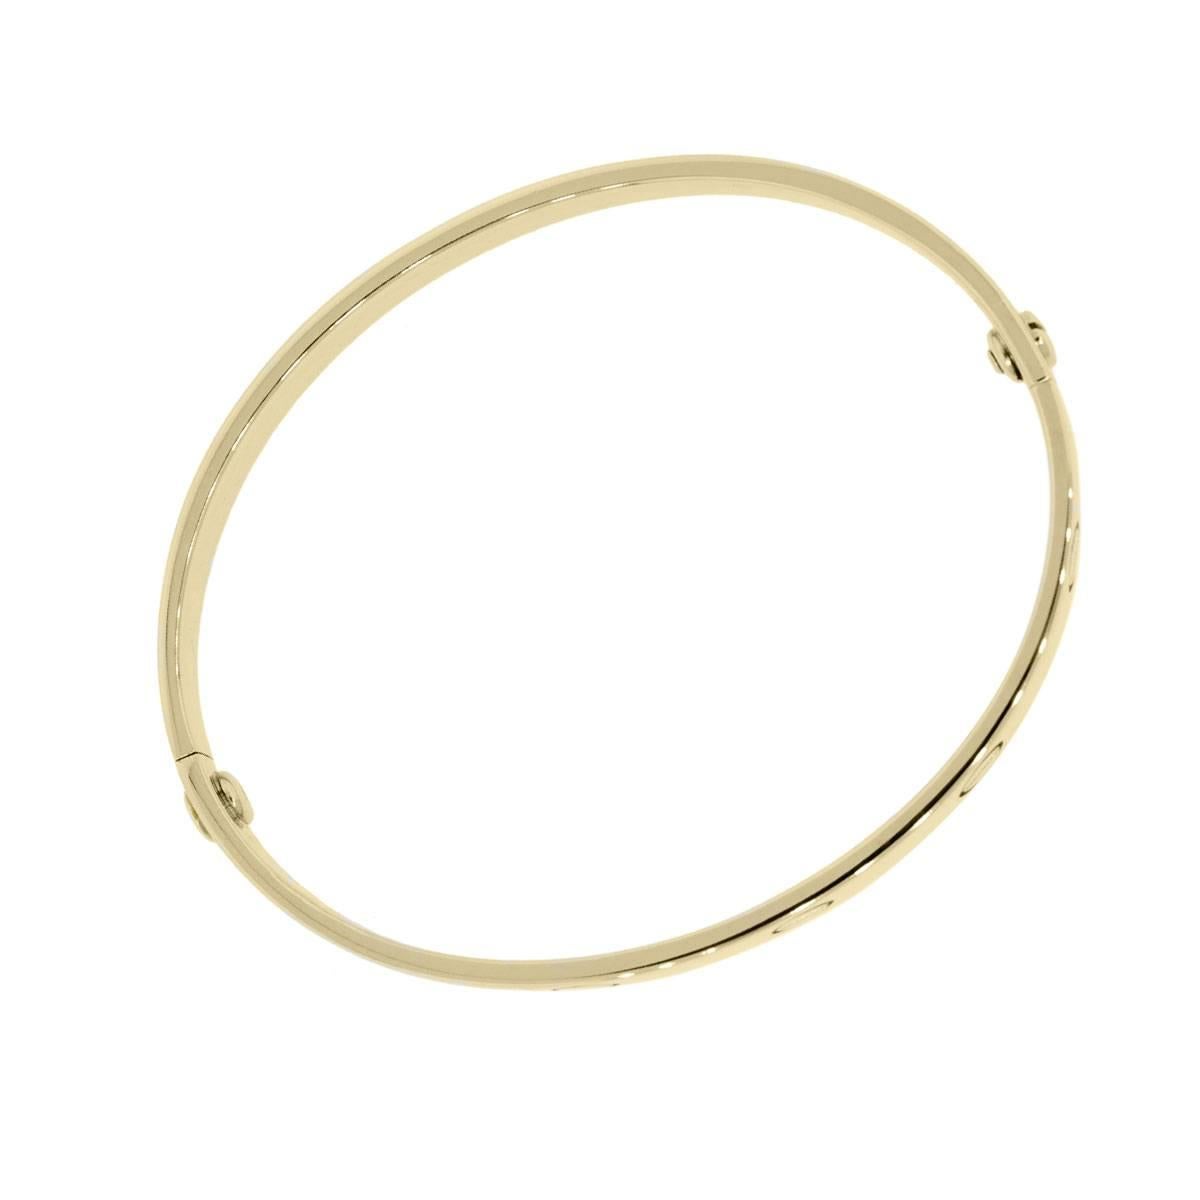 Brand: Cartier
Style: Love Bangle
Metal: 18k Yellow Gold
Bracelet Size: Cartier size 17 (will fit a 6.25″ wrist)
Total Weight: 27.2g (17.5dwt)
Closure: (2) Screw Closure
Additional Details: Comes with Raymond Lee Jewelers Presentation Box and